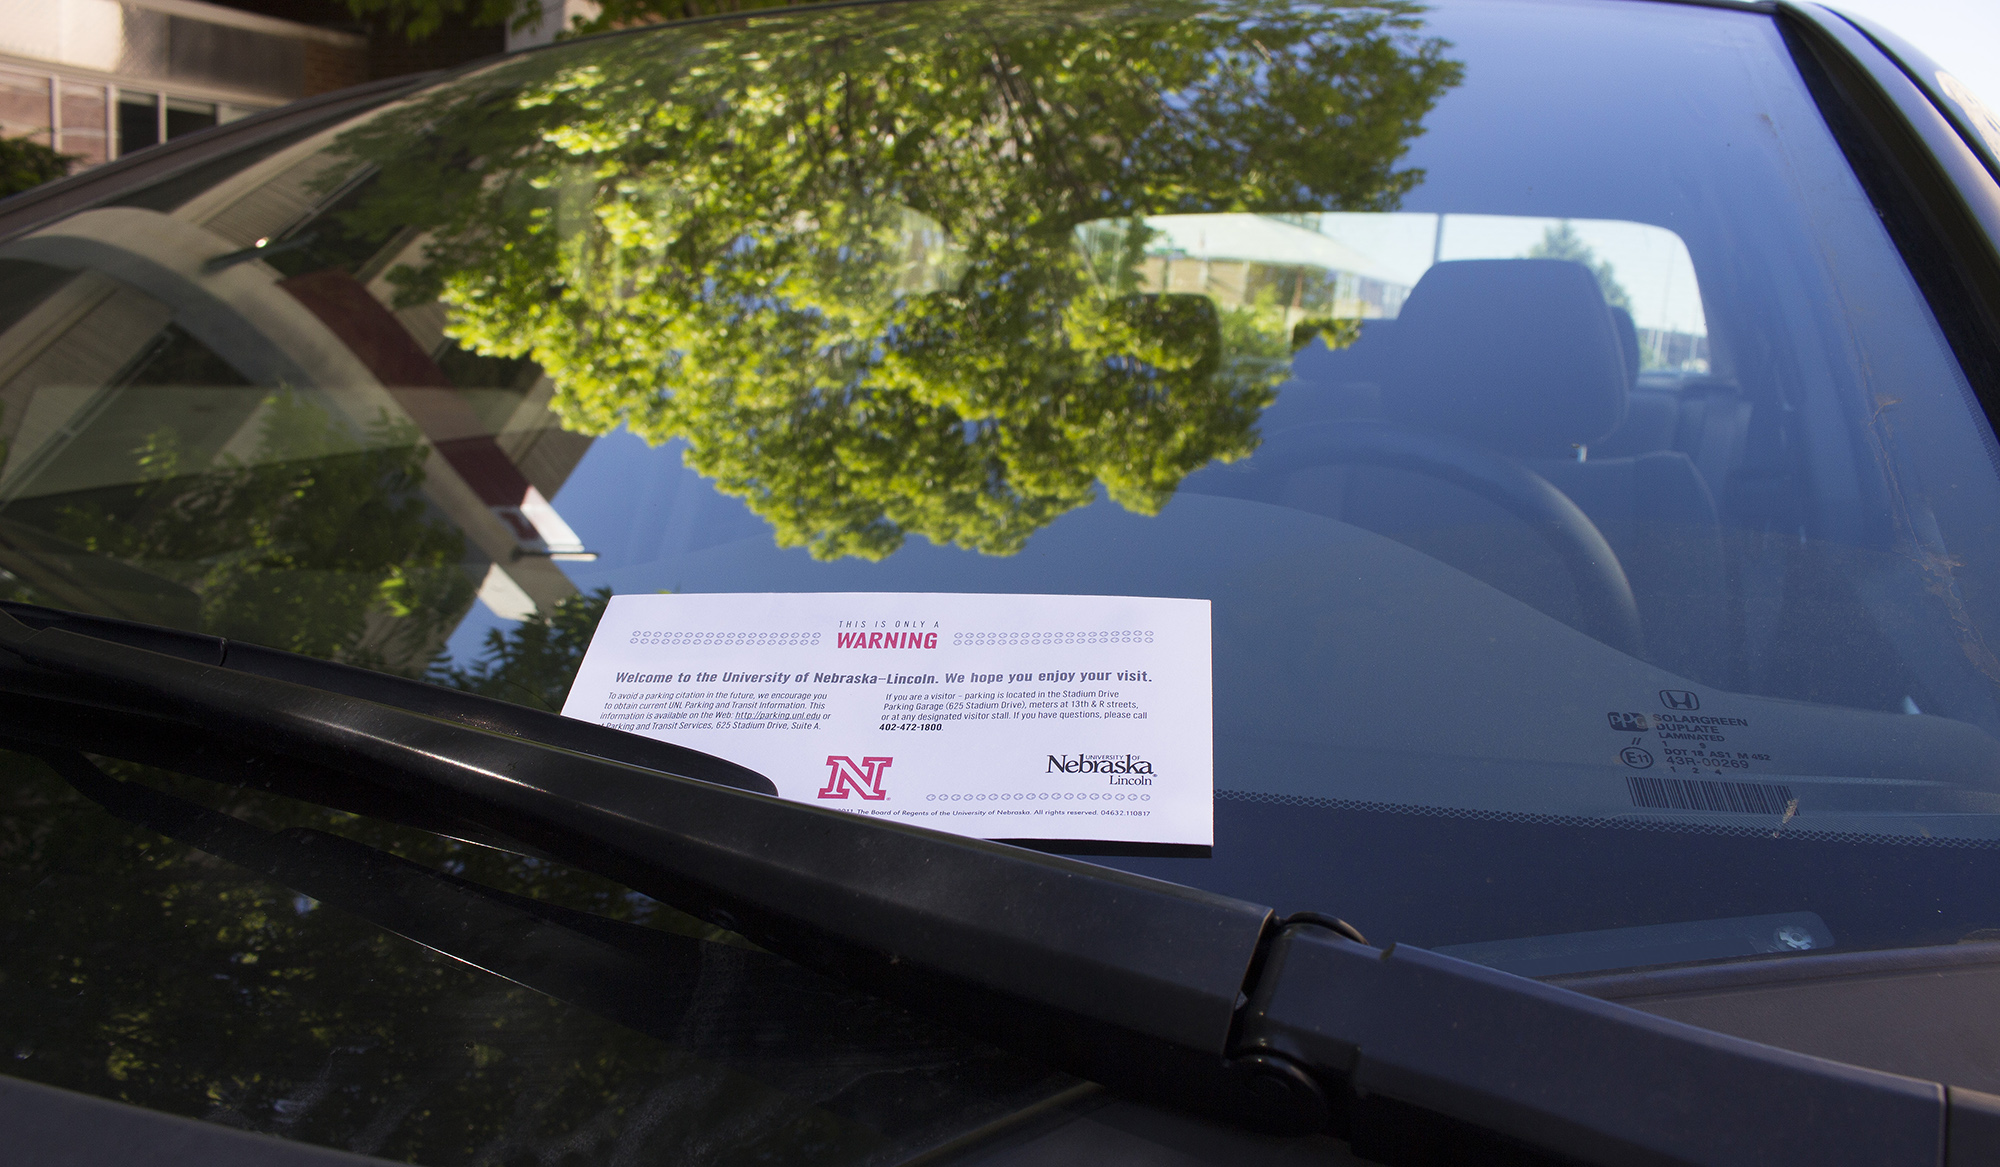 Warning letter from parking enforcement tucked under car wiper